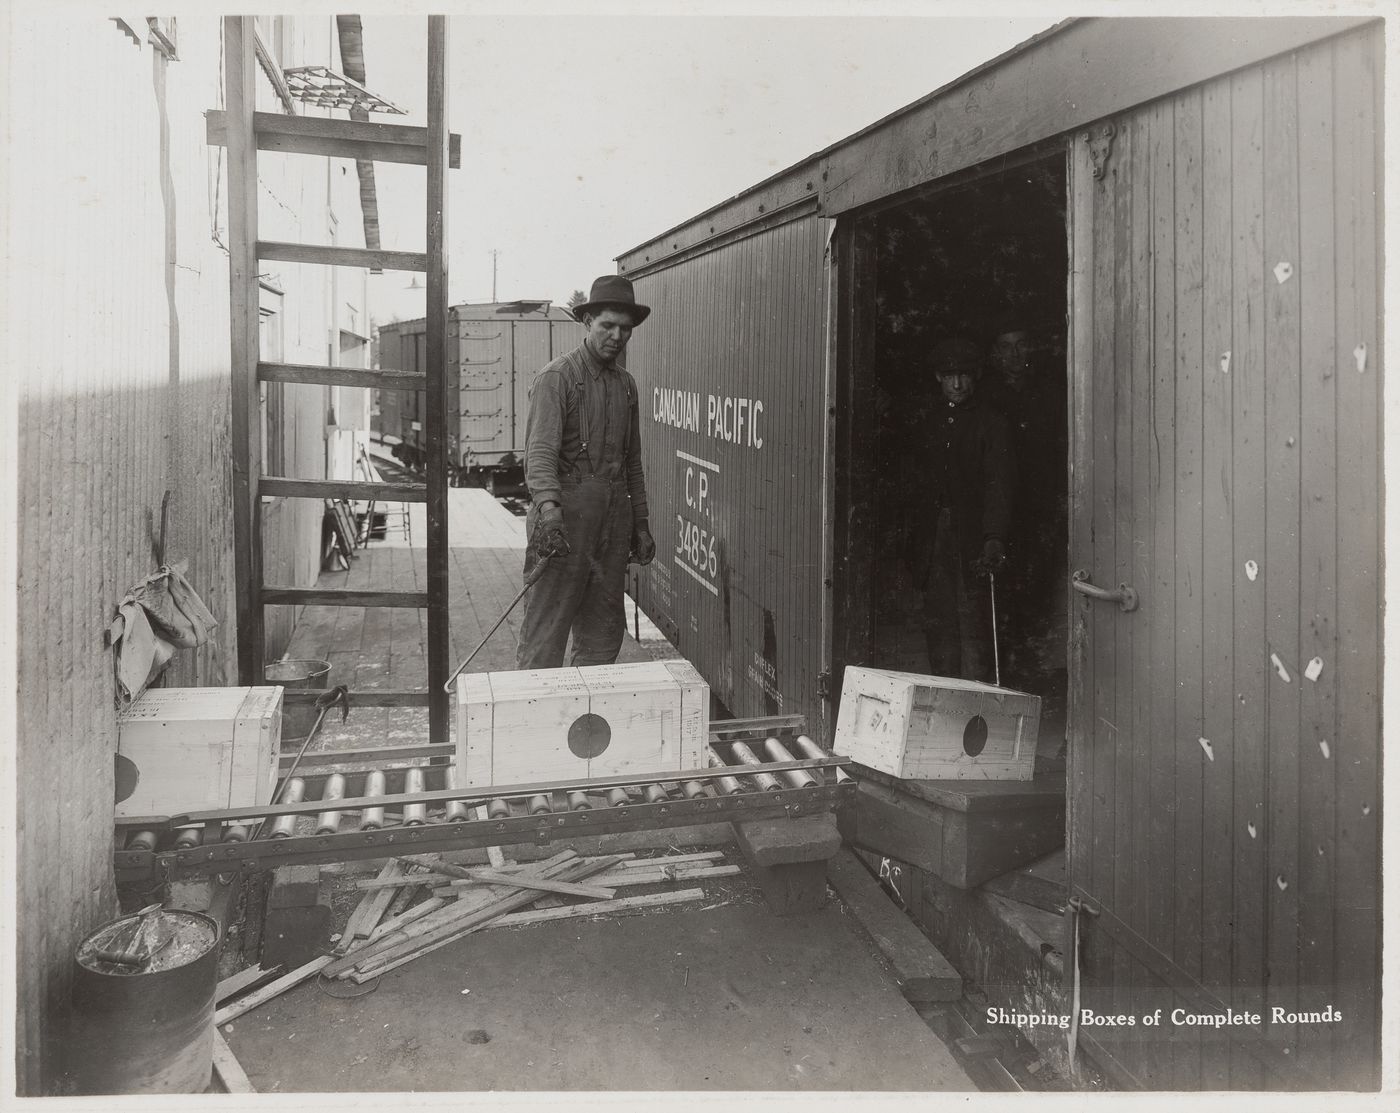 Exterior view of workers shipping boxes of complete rounds at the Energite Explosives Plant No. 3, the Shell Loading Plant, Renfrew, Ontario, Canada